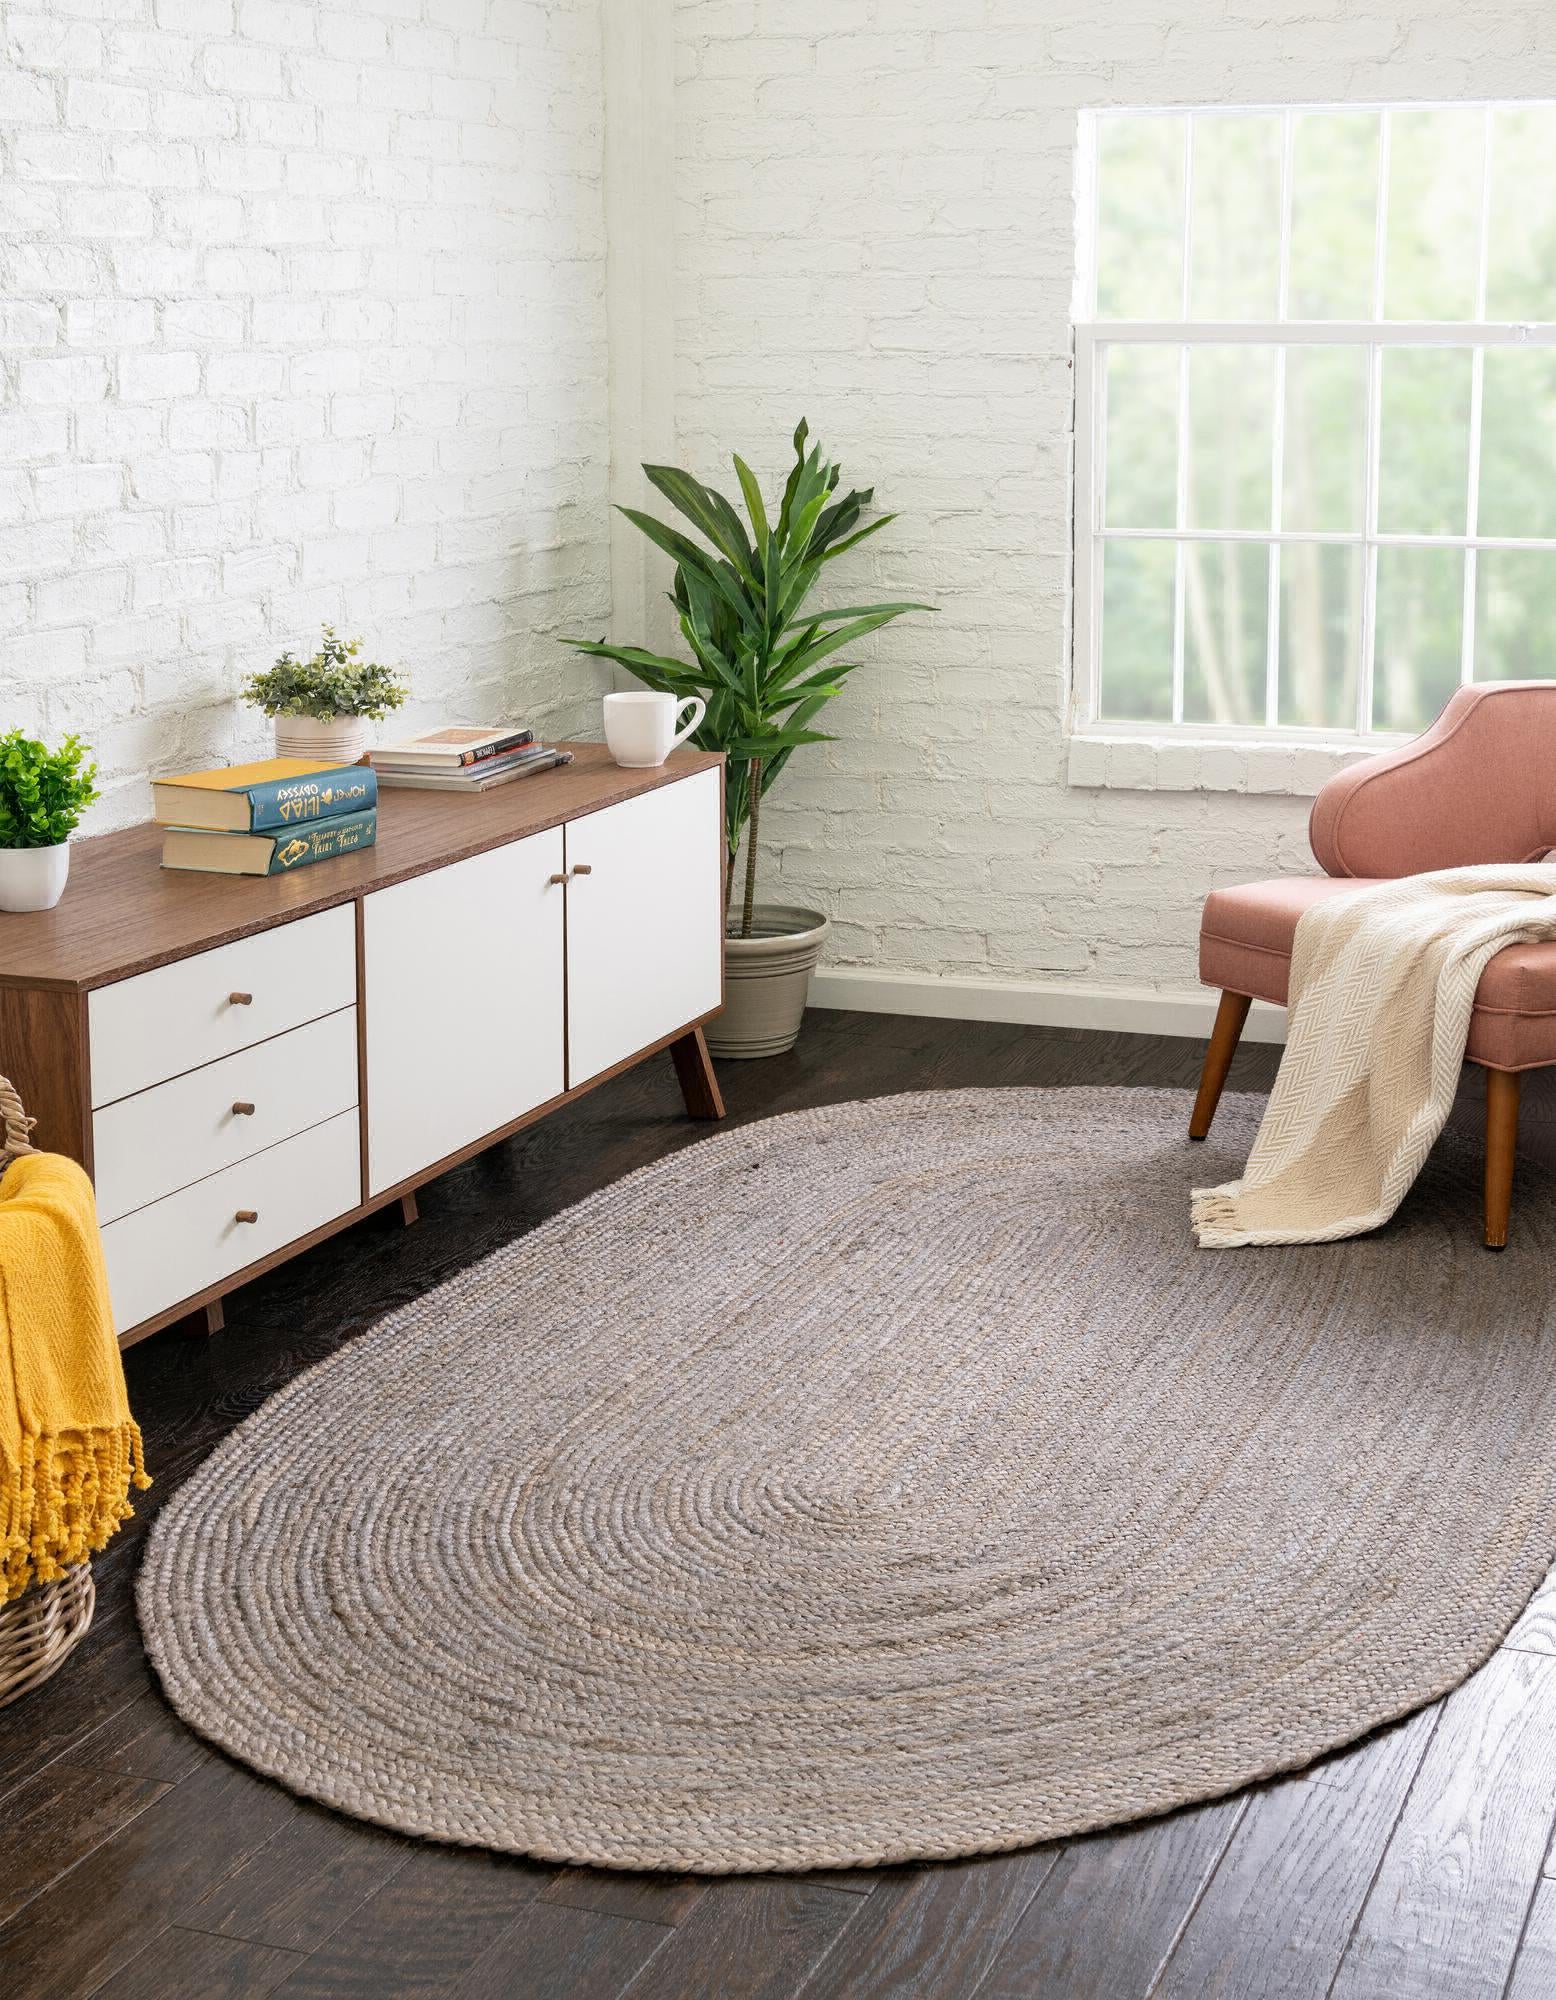 Unique Loom Braided Jute MGN-5-7-8 Gray Area Rug – Incredible Rugs